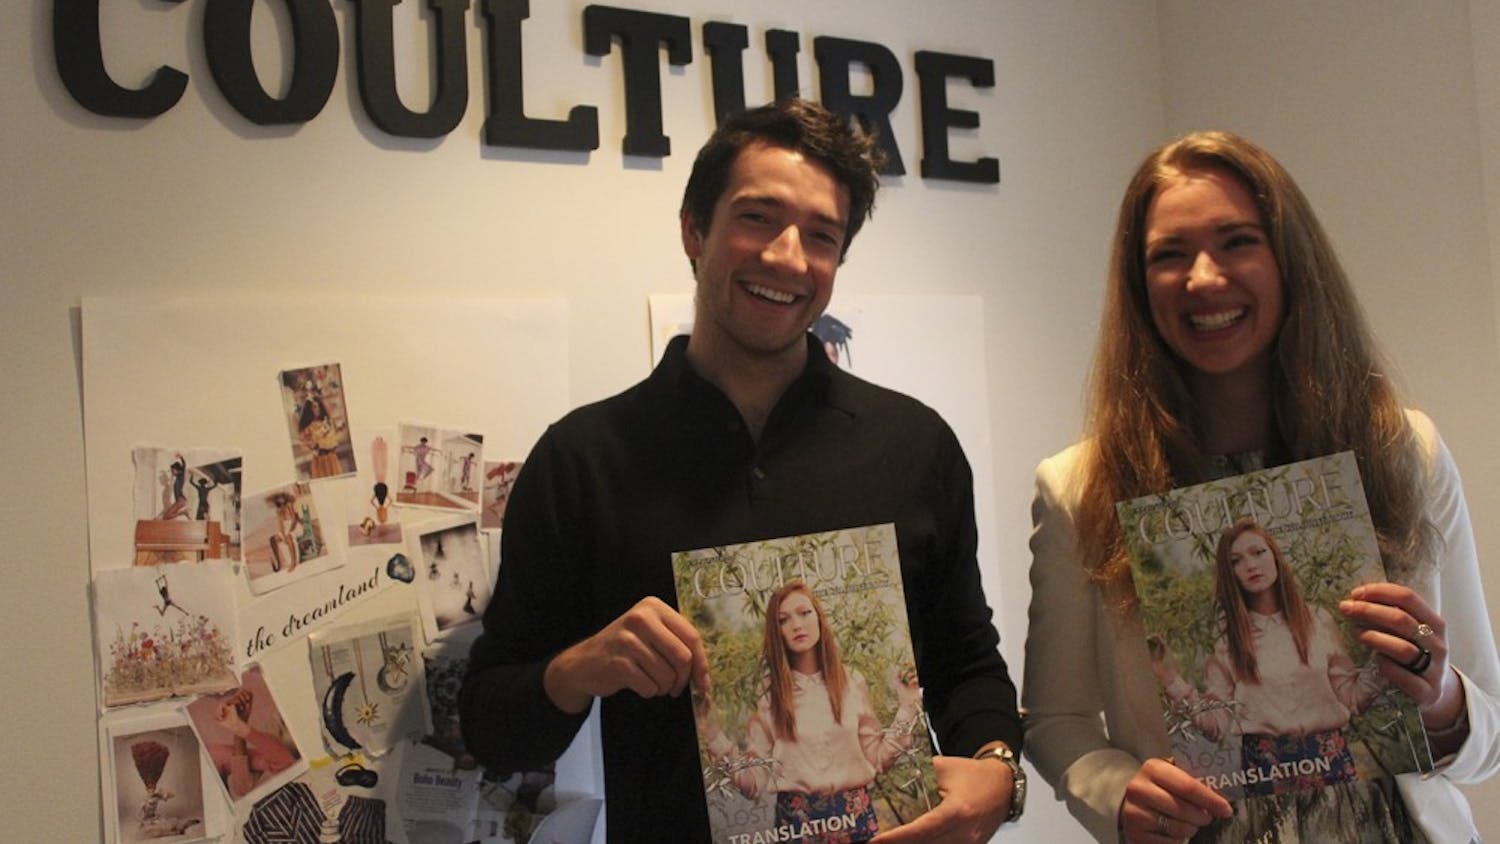 Coulture Magazine is a student-run fashion magazine printed once each semester. Here, co-founders Alexandra Hehlen and Remington Remmel pose for a picture in their new office at 145 Franklin St.